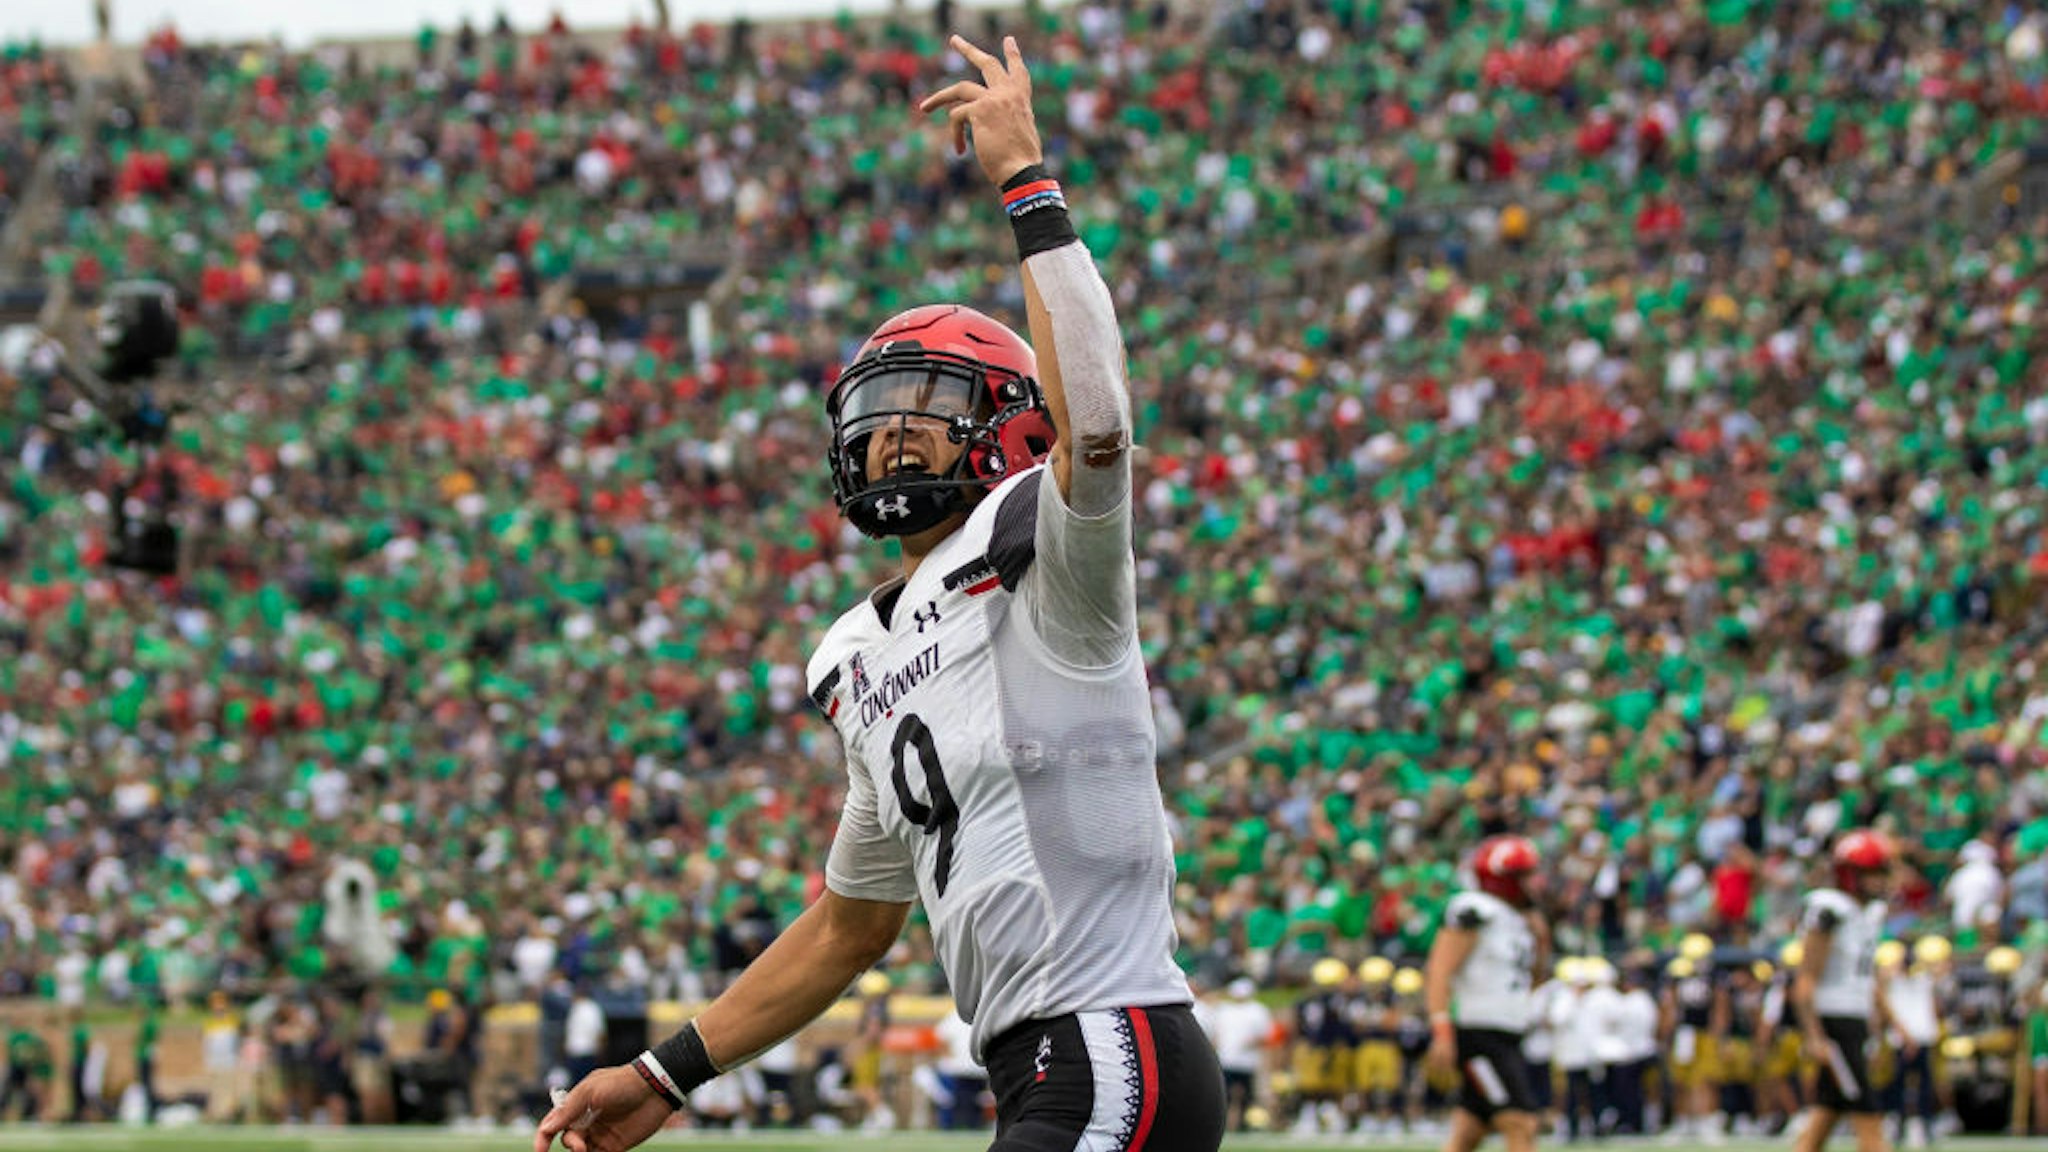 SOUTH BEND, IN - OCTOBER 02: Cincinnati Bearcats quarterback Desmond Ritter (9) celebrates after scoring a touchdown in the 2nd half against the Notre Dame Fighting Irish during a game between the Notre Dame Fighting Irish and the Cincinnati Bearcats on October, 2021 at Notre Dame Stadium in South Bend, IN. (Photo by Brandon Sloter/Icon Sportswire via Getty Images)